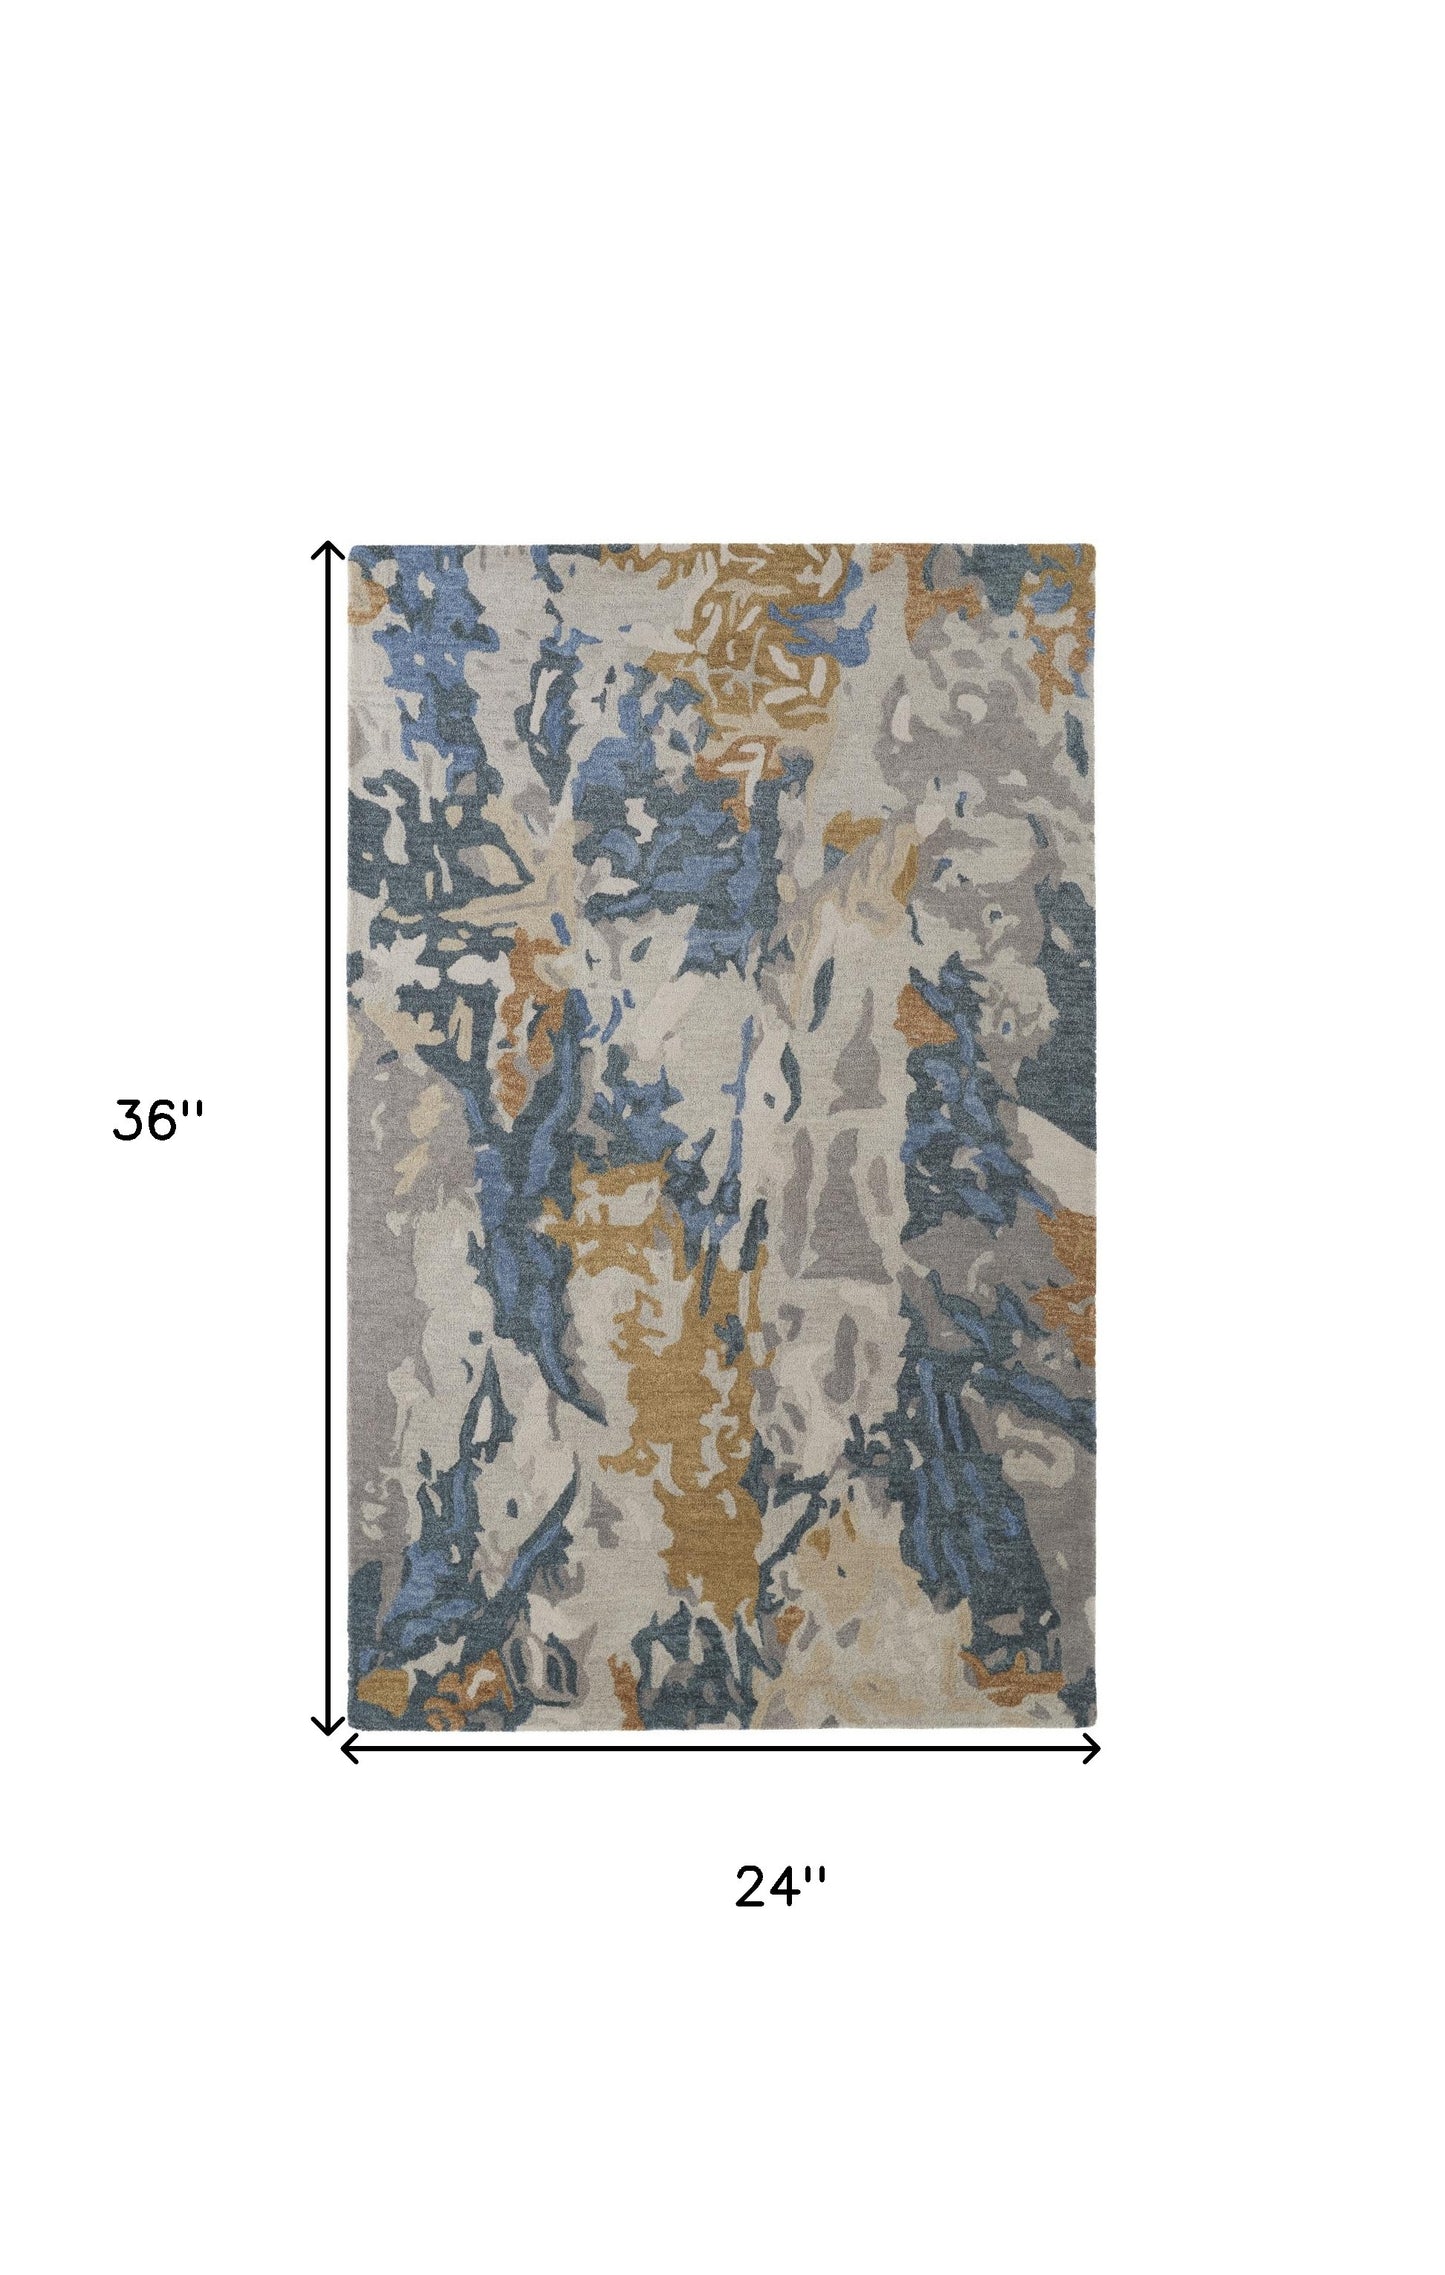 8' X 10' Gray Blue And Gold Wool Abstract Tufted Handmade Stain Resistant Area Rug